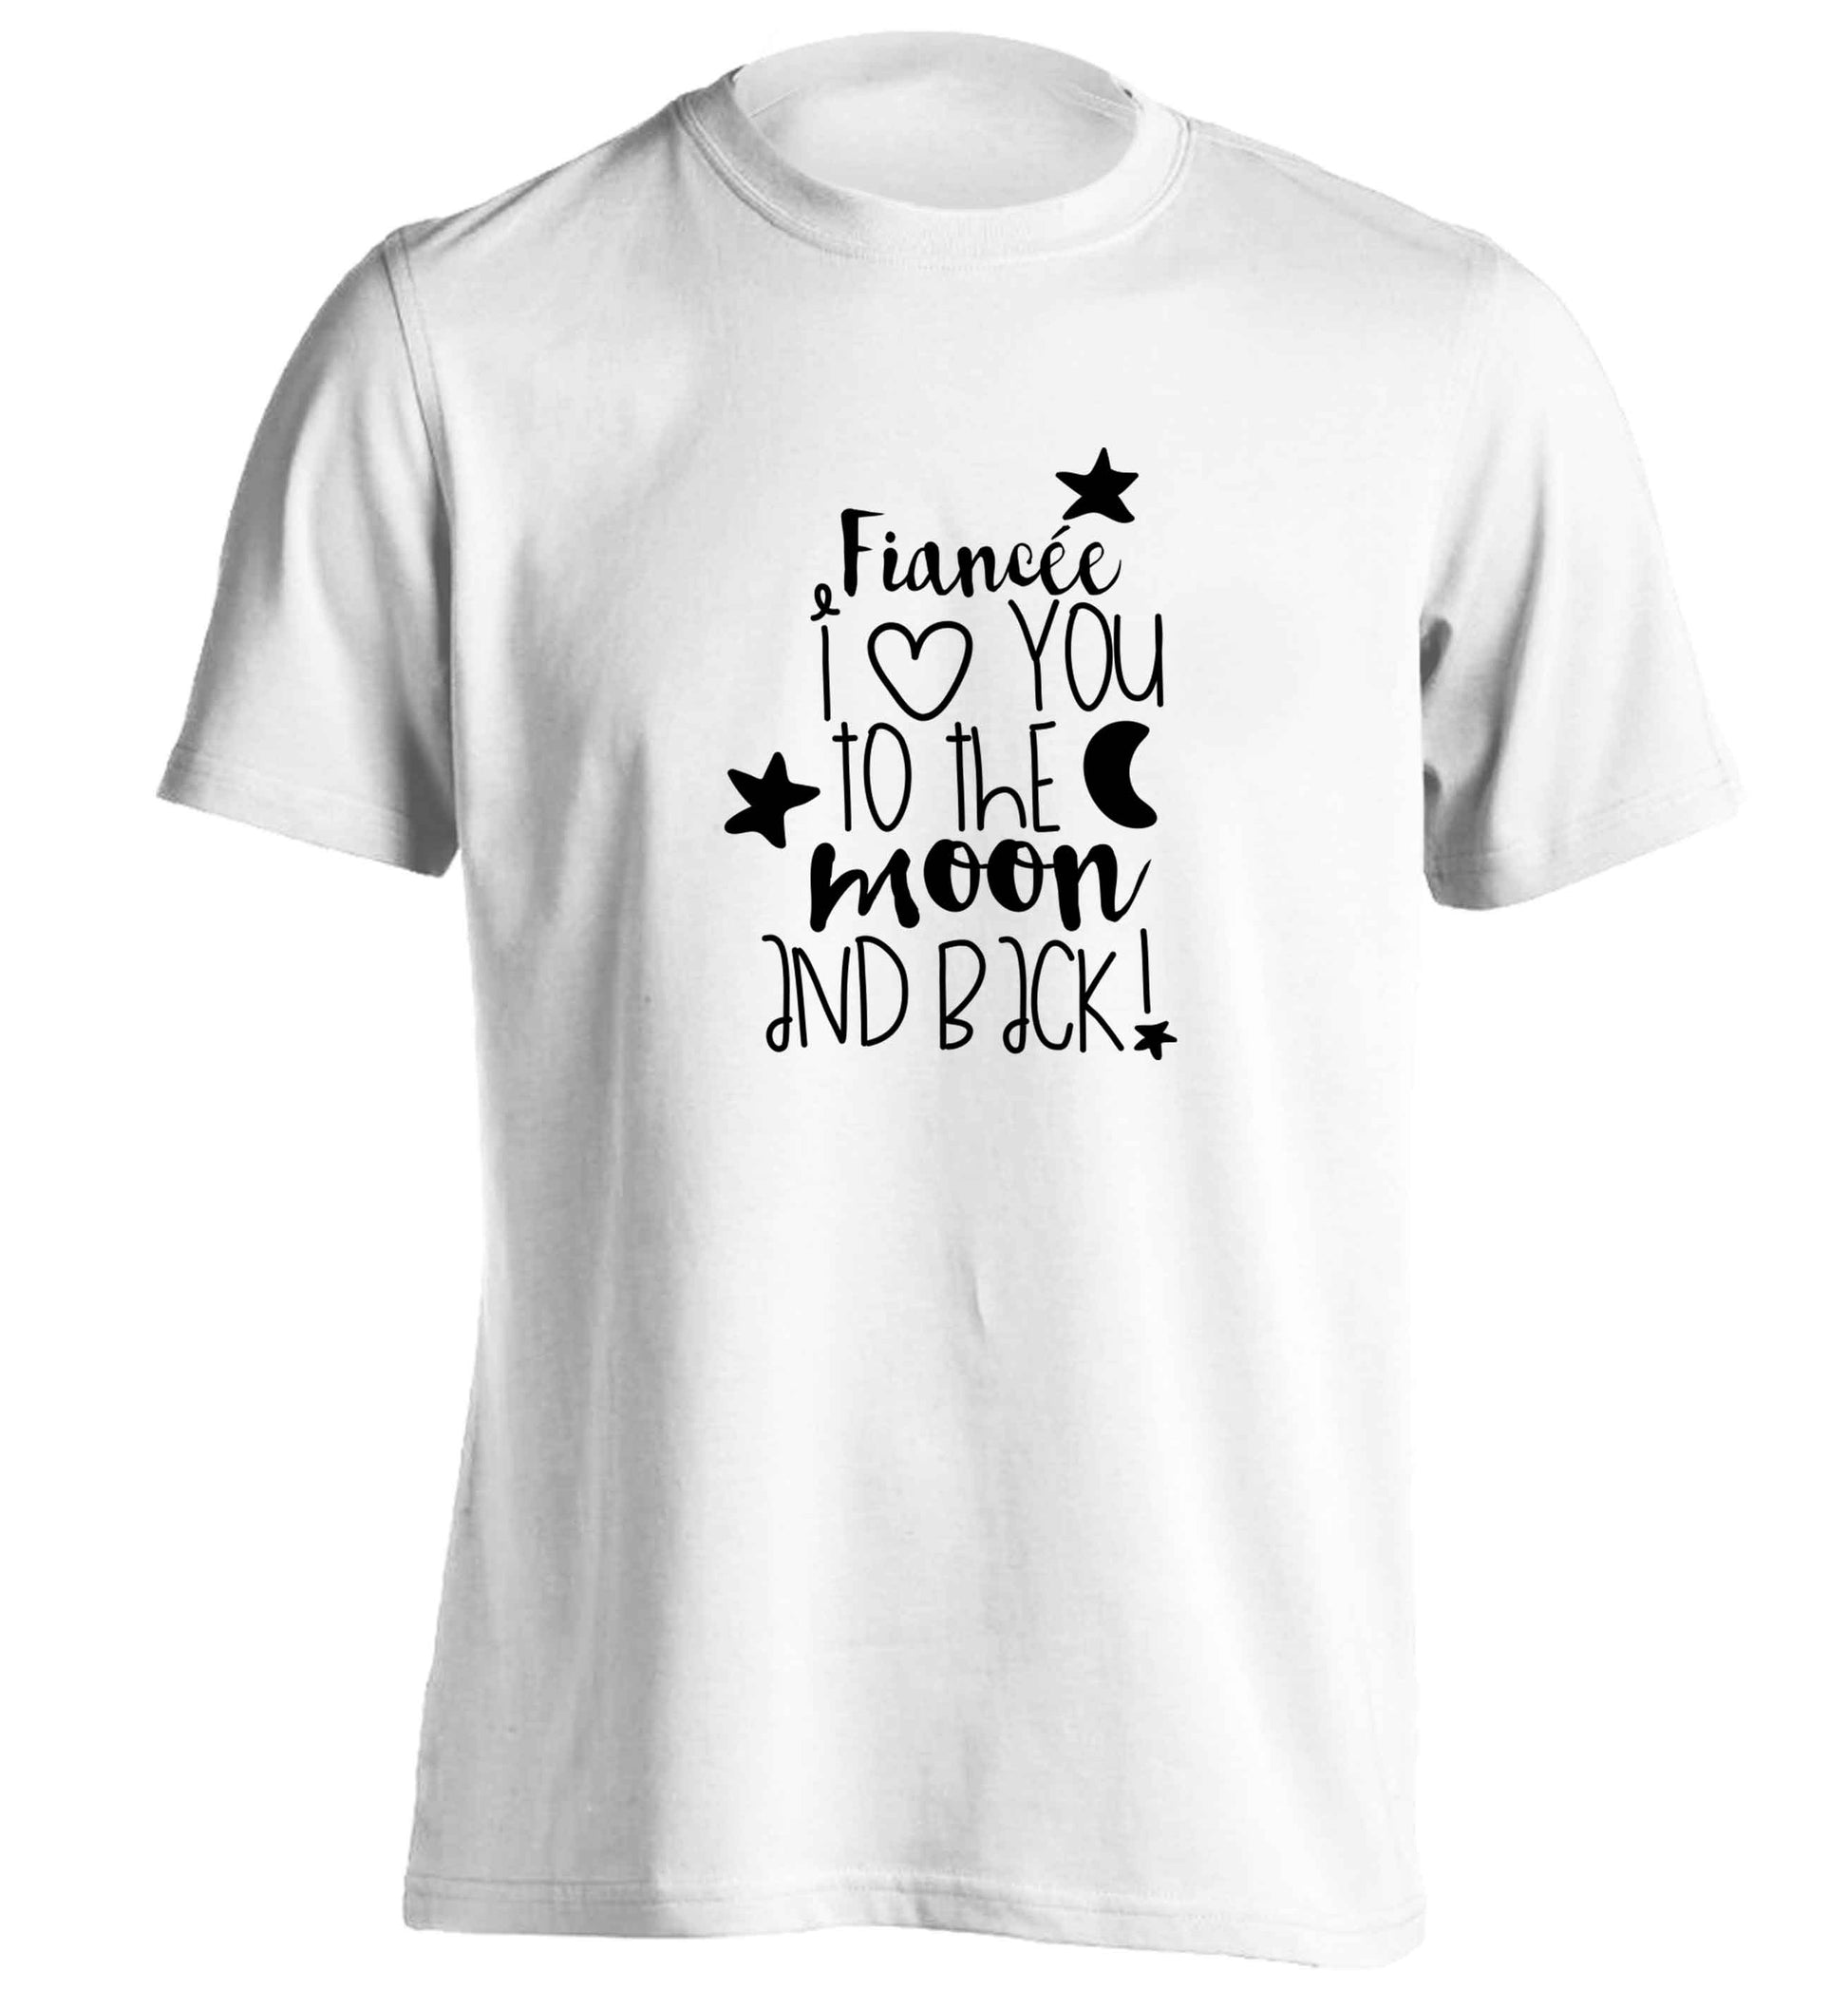 Fianc√©e I love you to the moon and back adults unisex white Tshirt 2XL